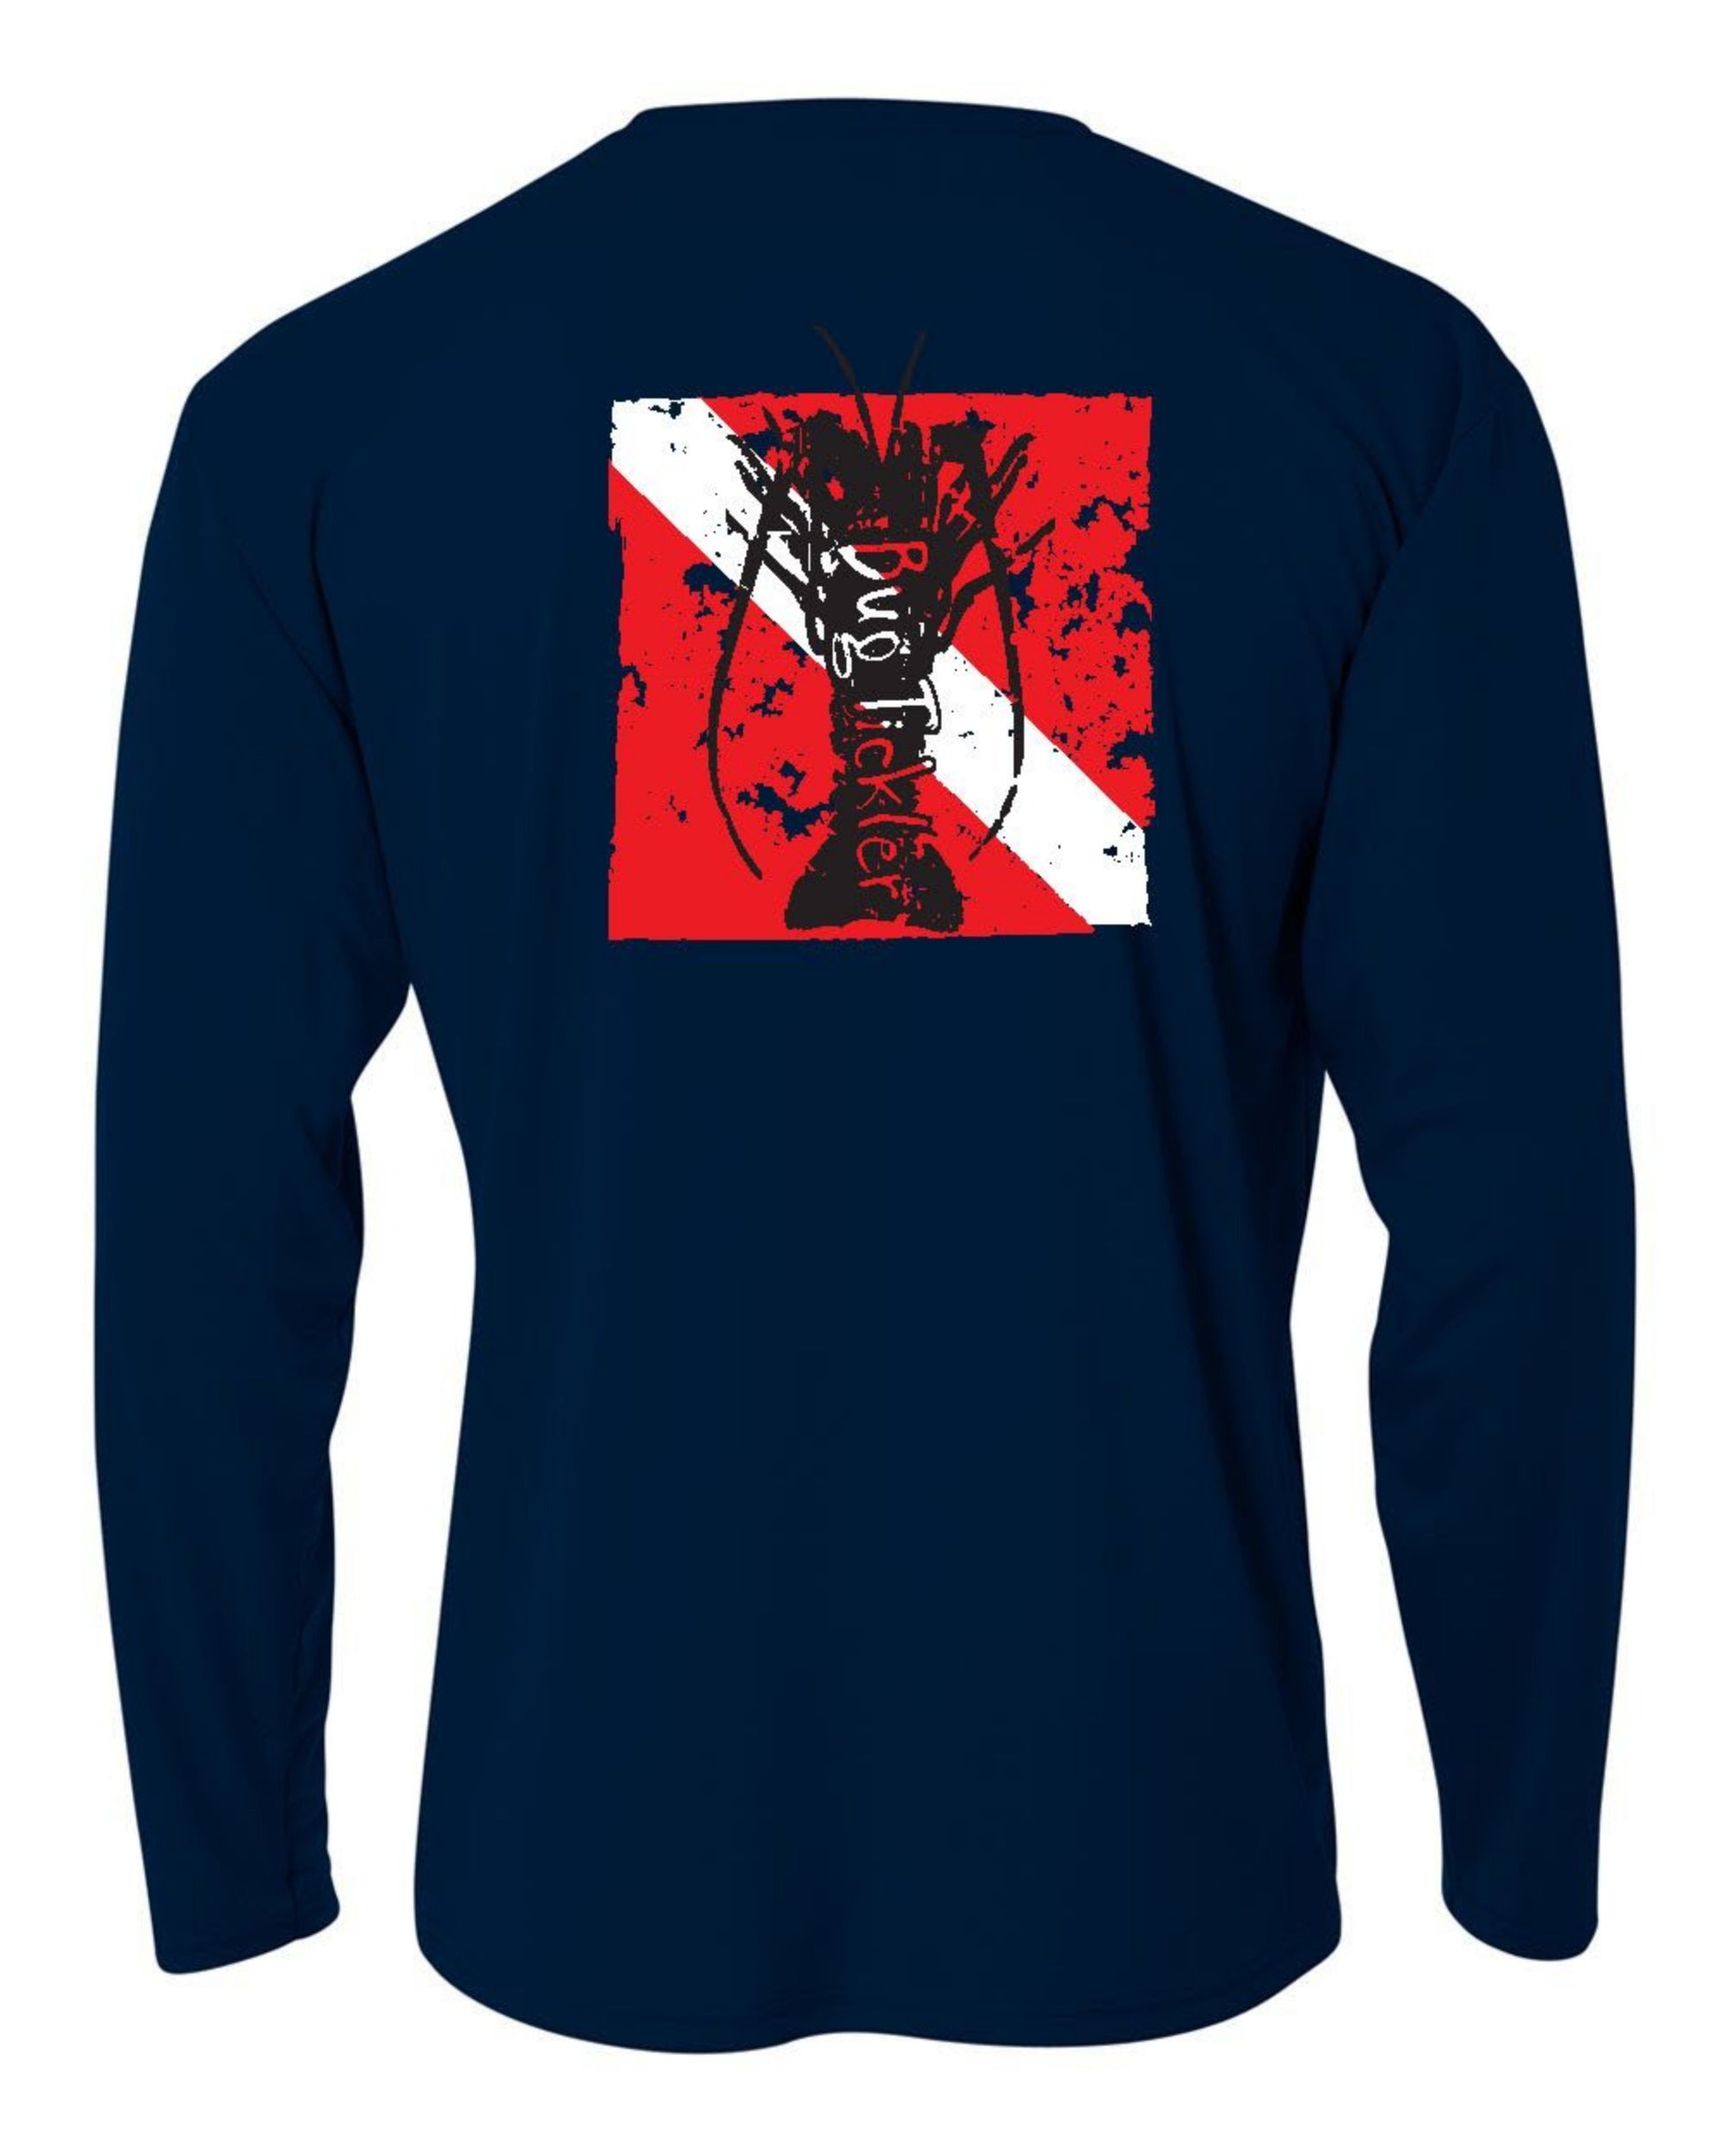 Navy Youth Lobster "Bug Tickler" Long Sleeve Performance Dry-Fit Shirts with Sun Protection by Reel Fishy Apparel